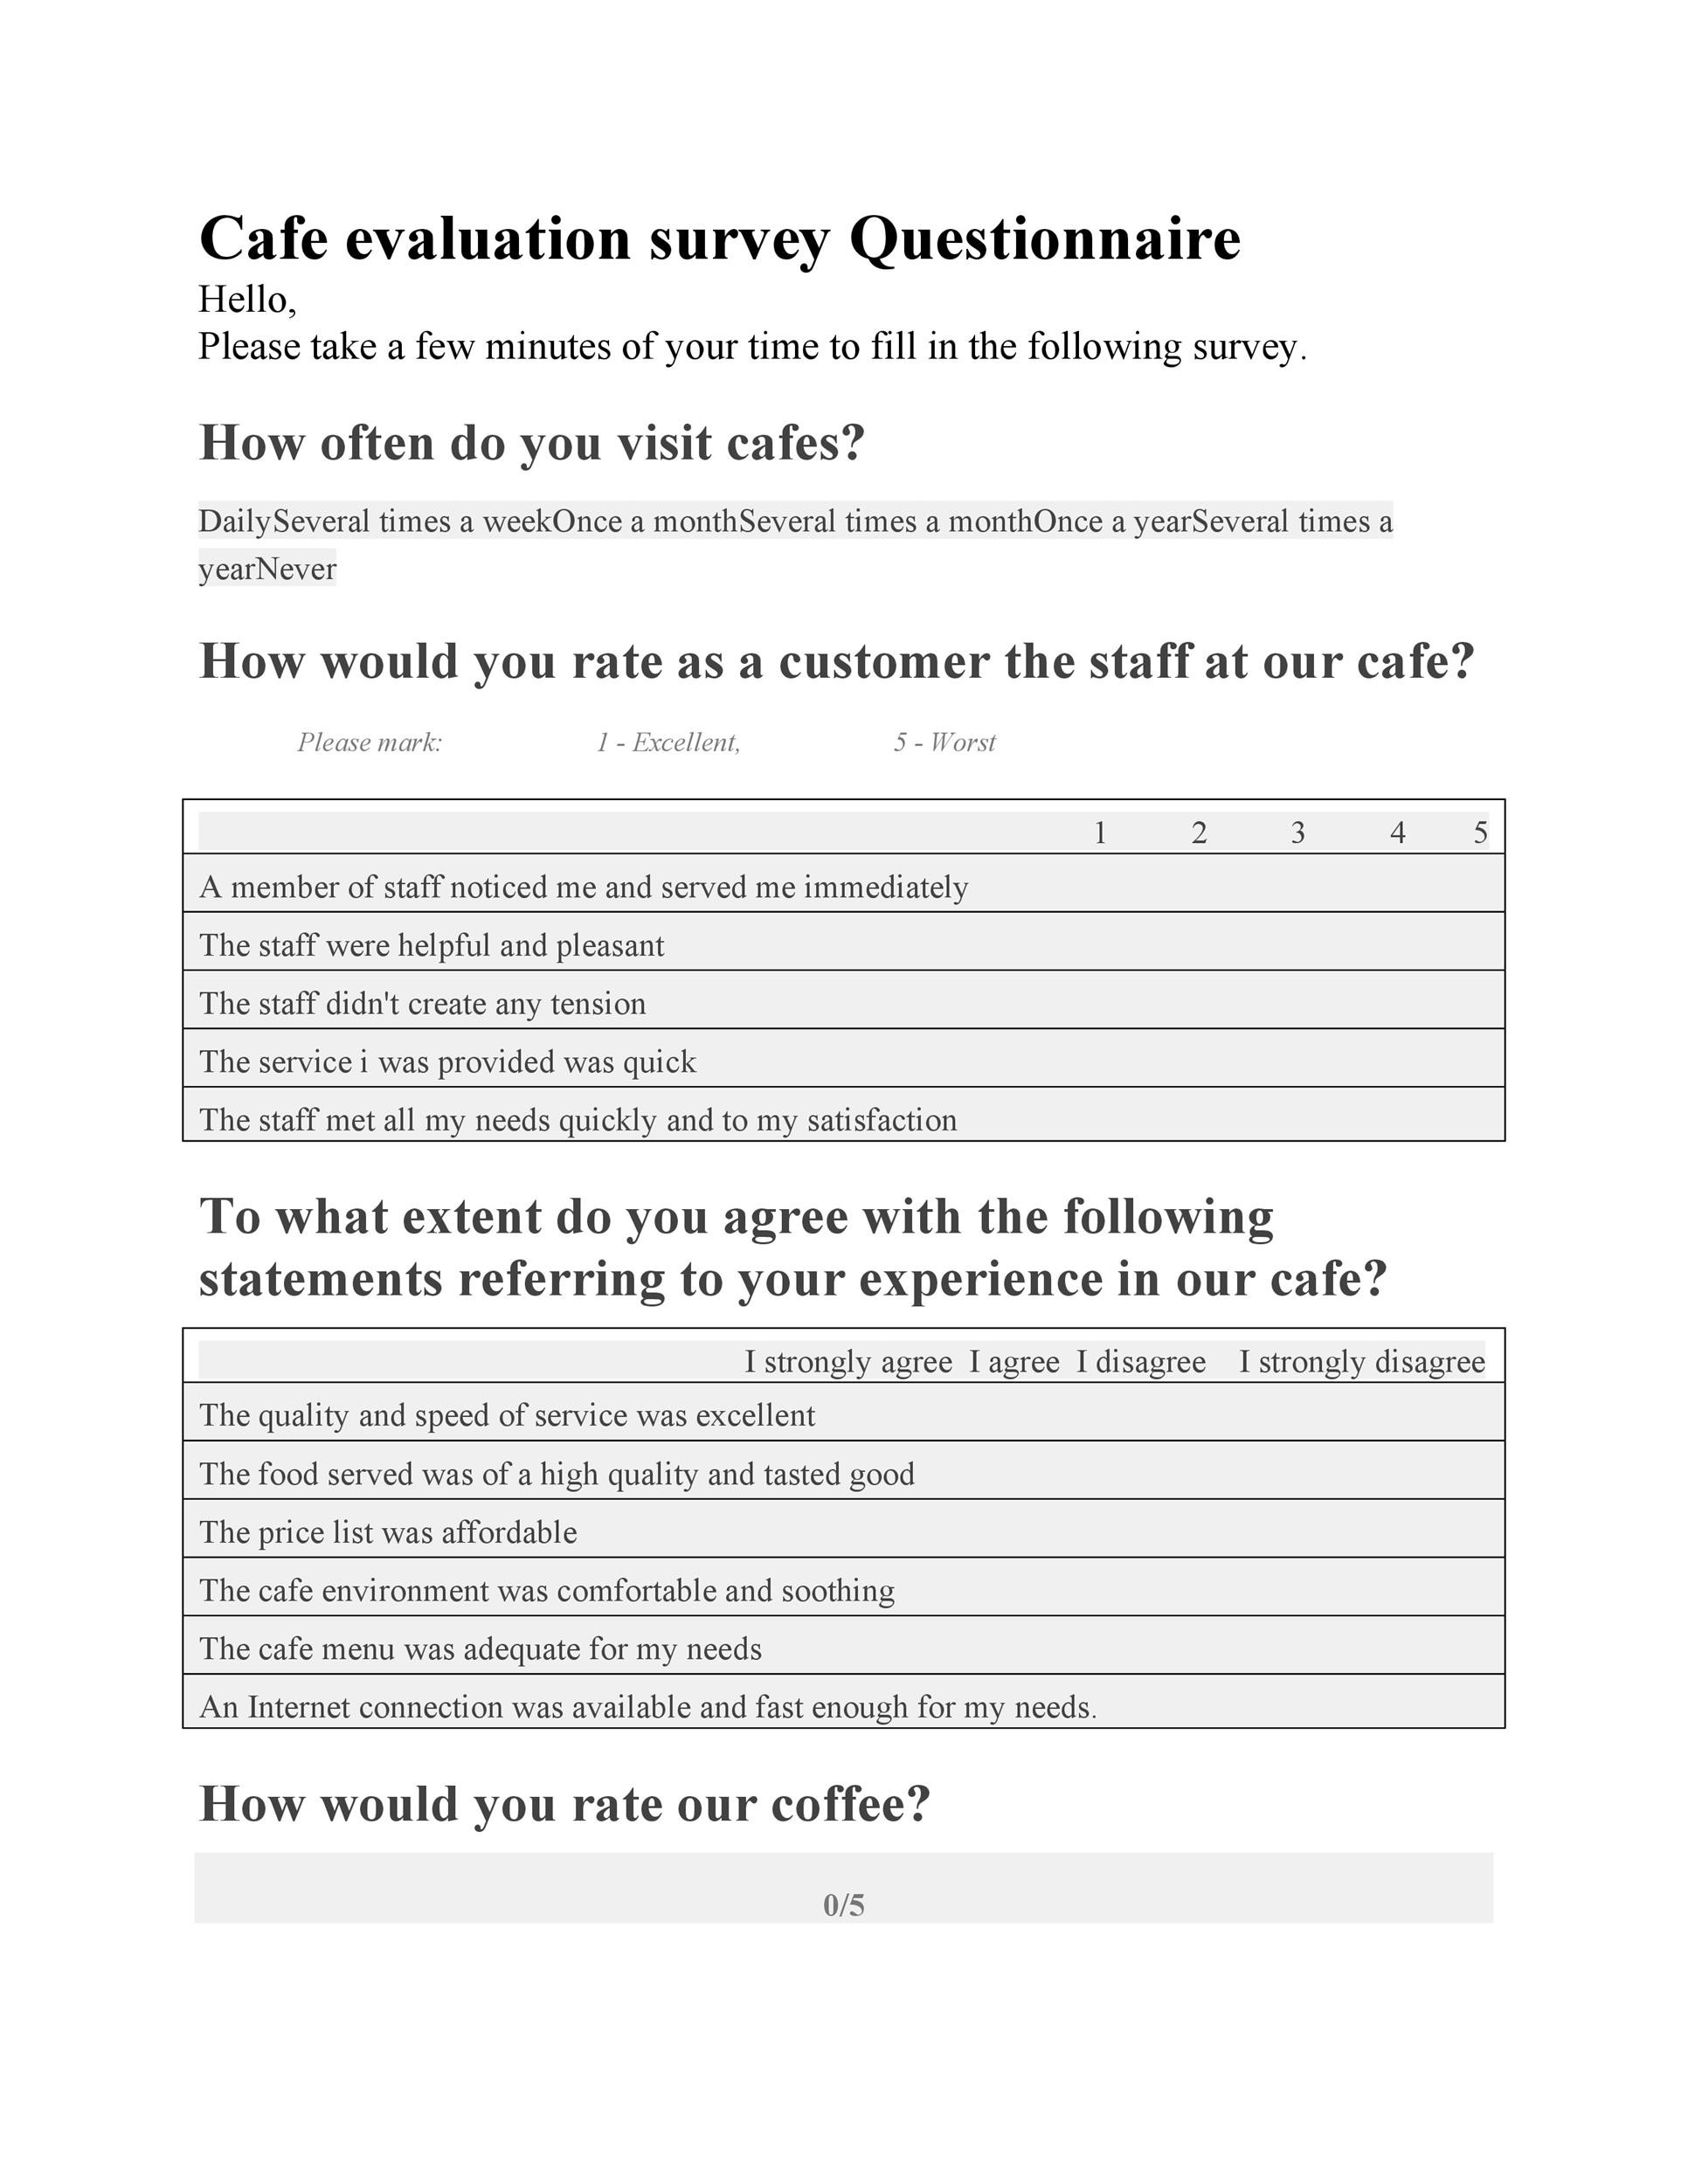 Cover letters for dissertation questionnaires